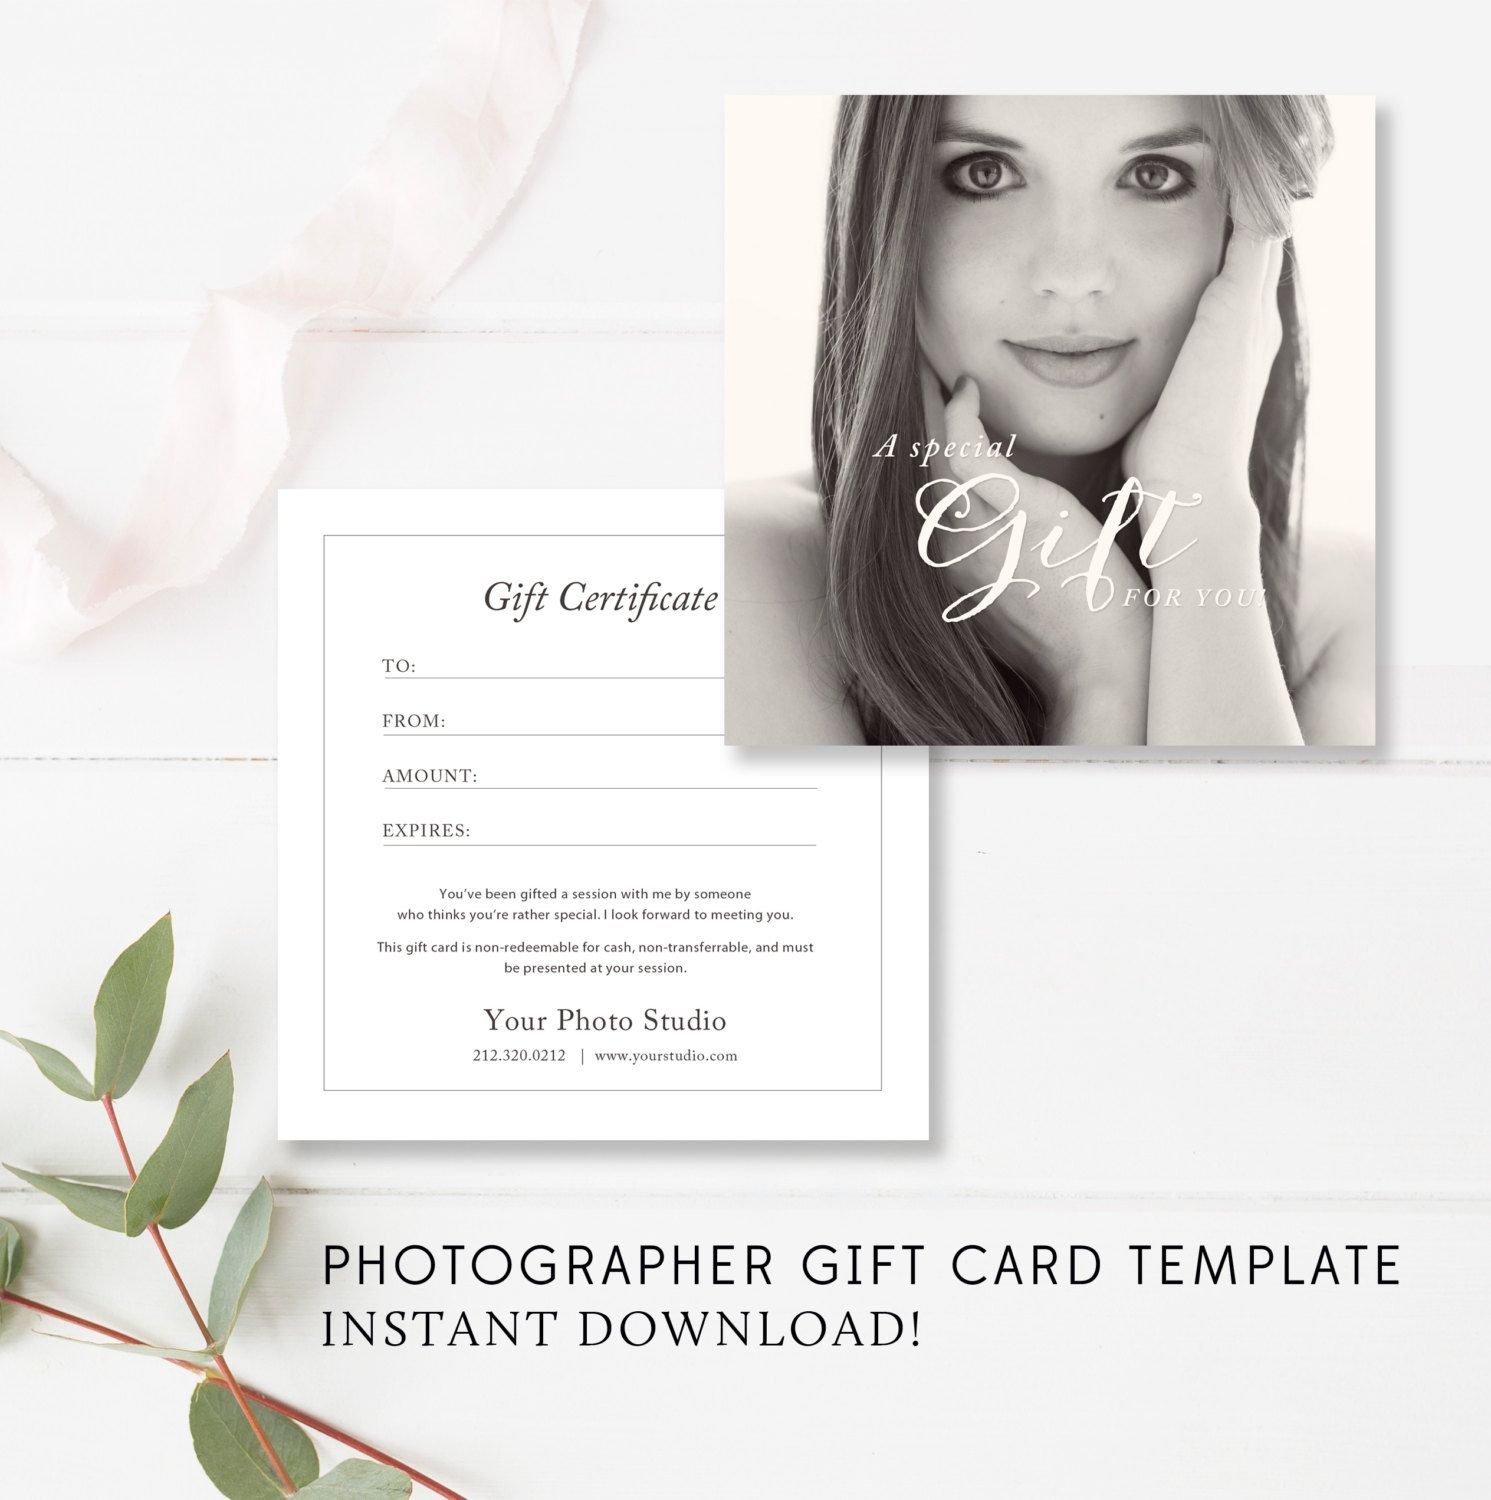 Photography Gift Card Template Photographer Gift Certificate | Etsy in Printable Photography Gift Certificate Template